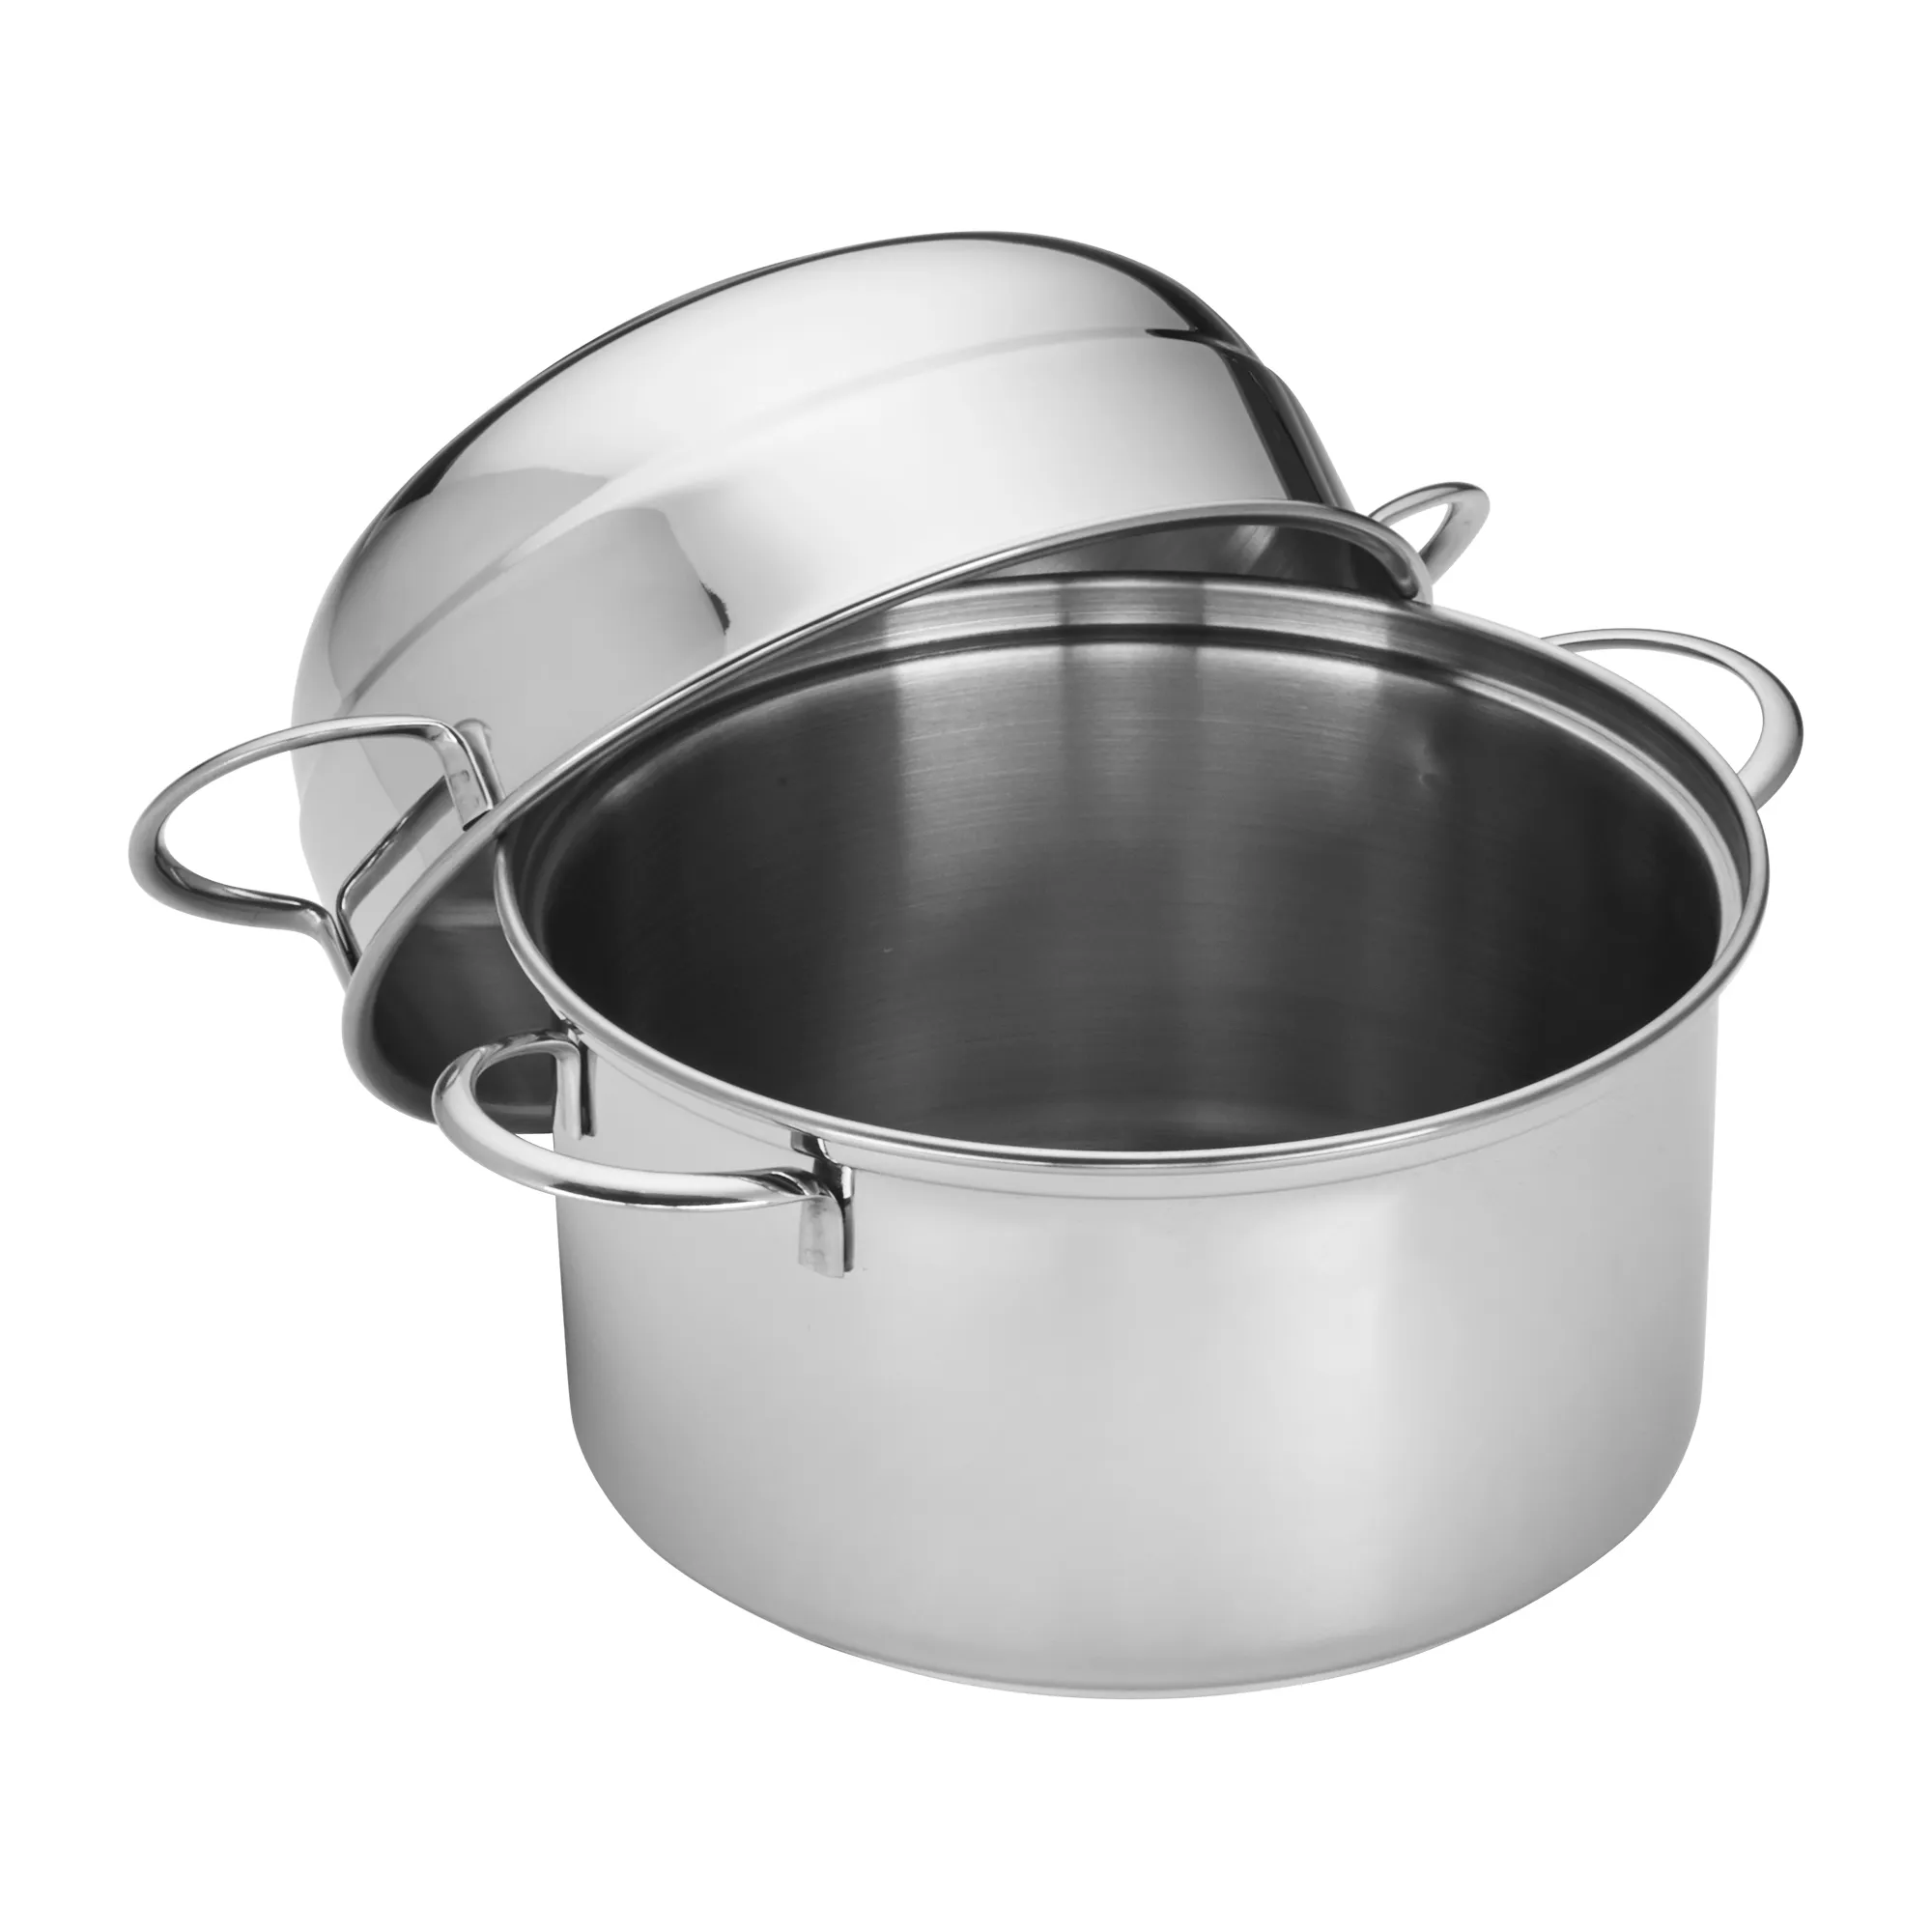 Demeyere Essential 5-Ply 8-qt Stainless Steel Stock Pot with Lid